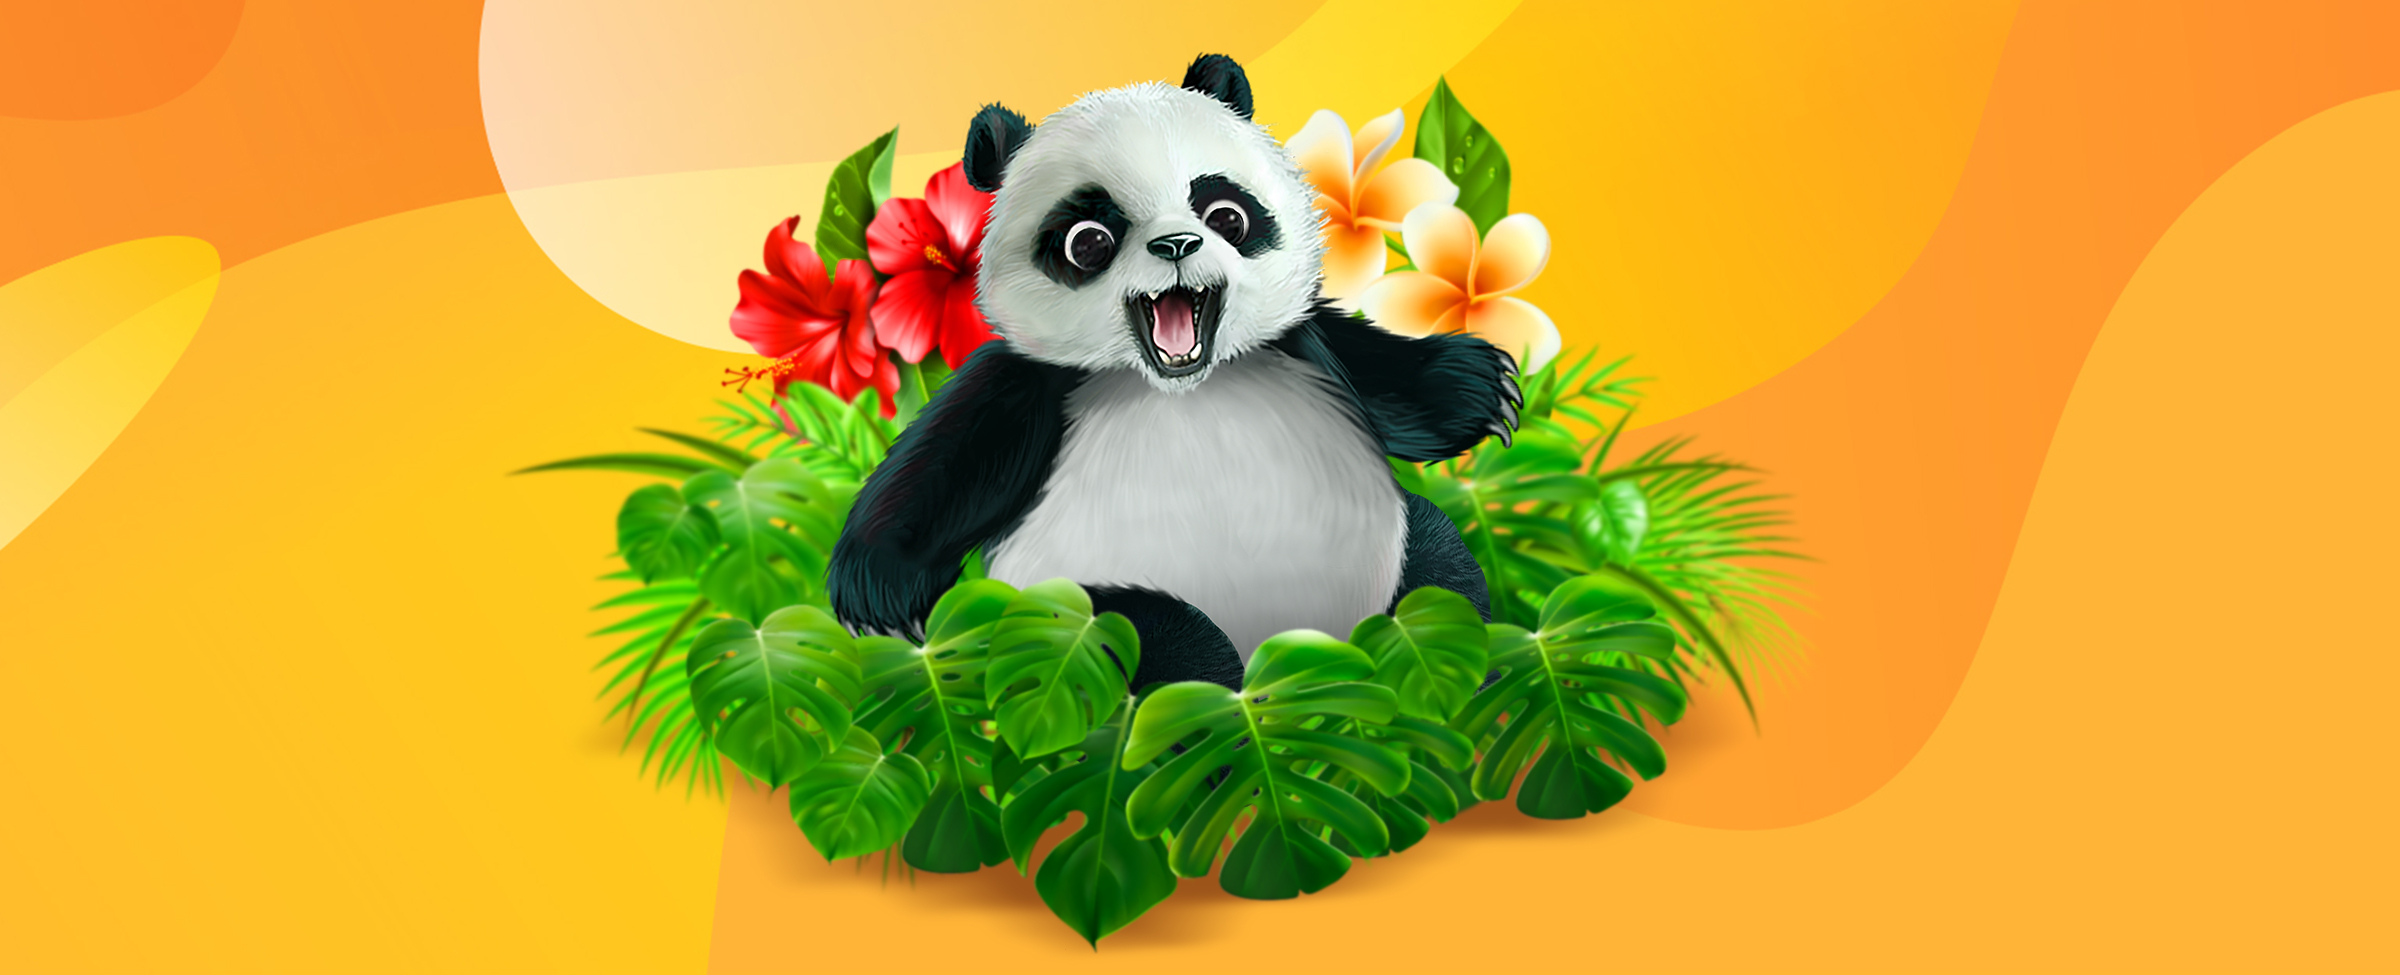 A cartoon character from the SlotsLV game Panda Pursuit sits amongst a pile of forest ferns and flowers